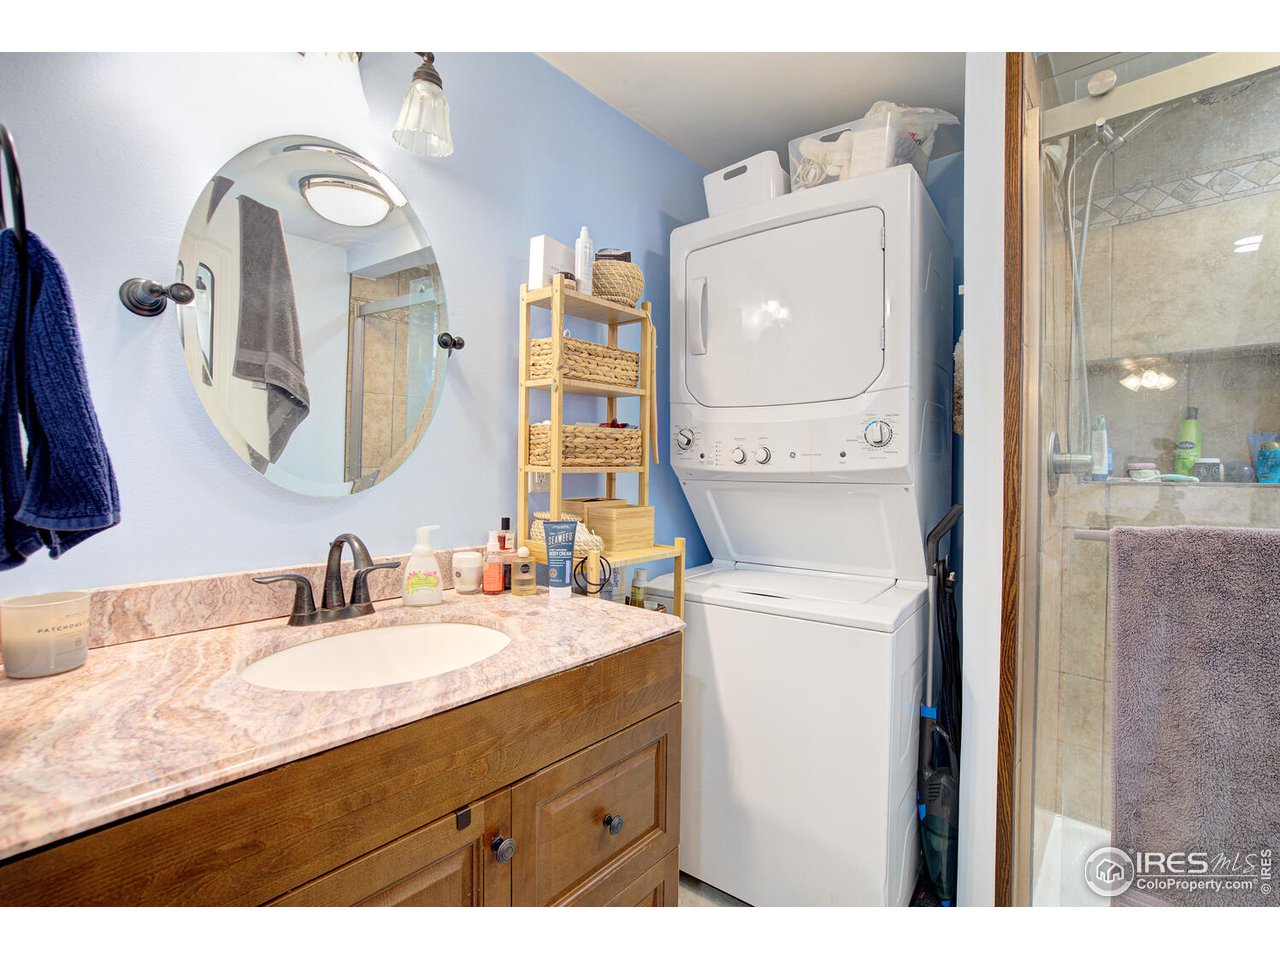 3/4 Bath and Laundry (included).